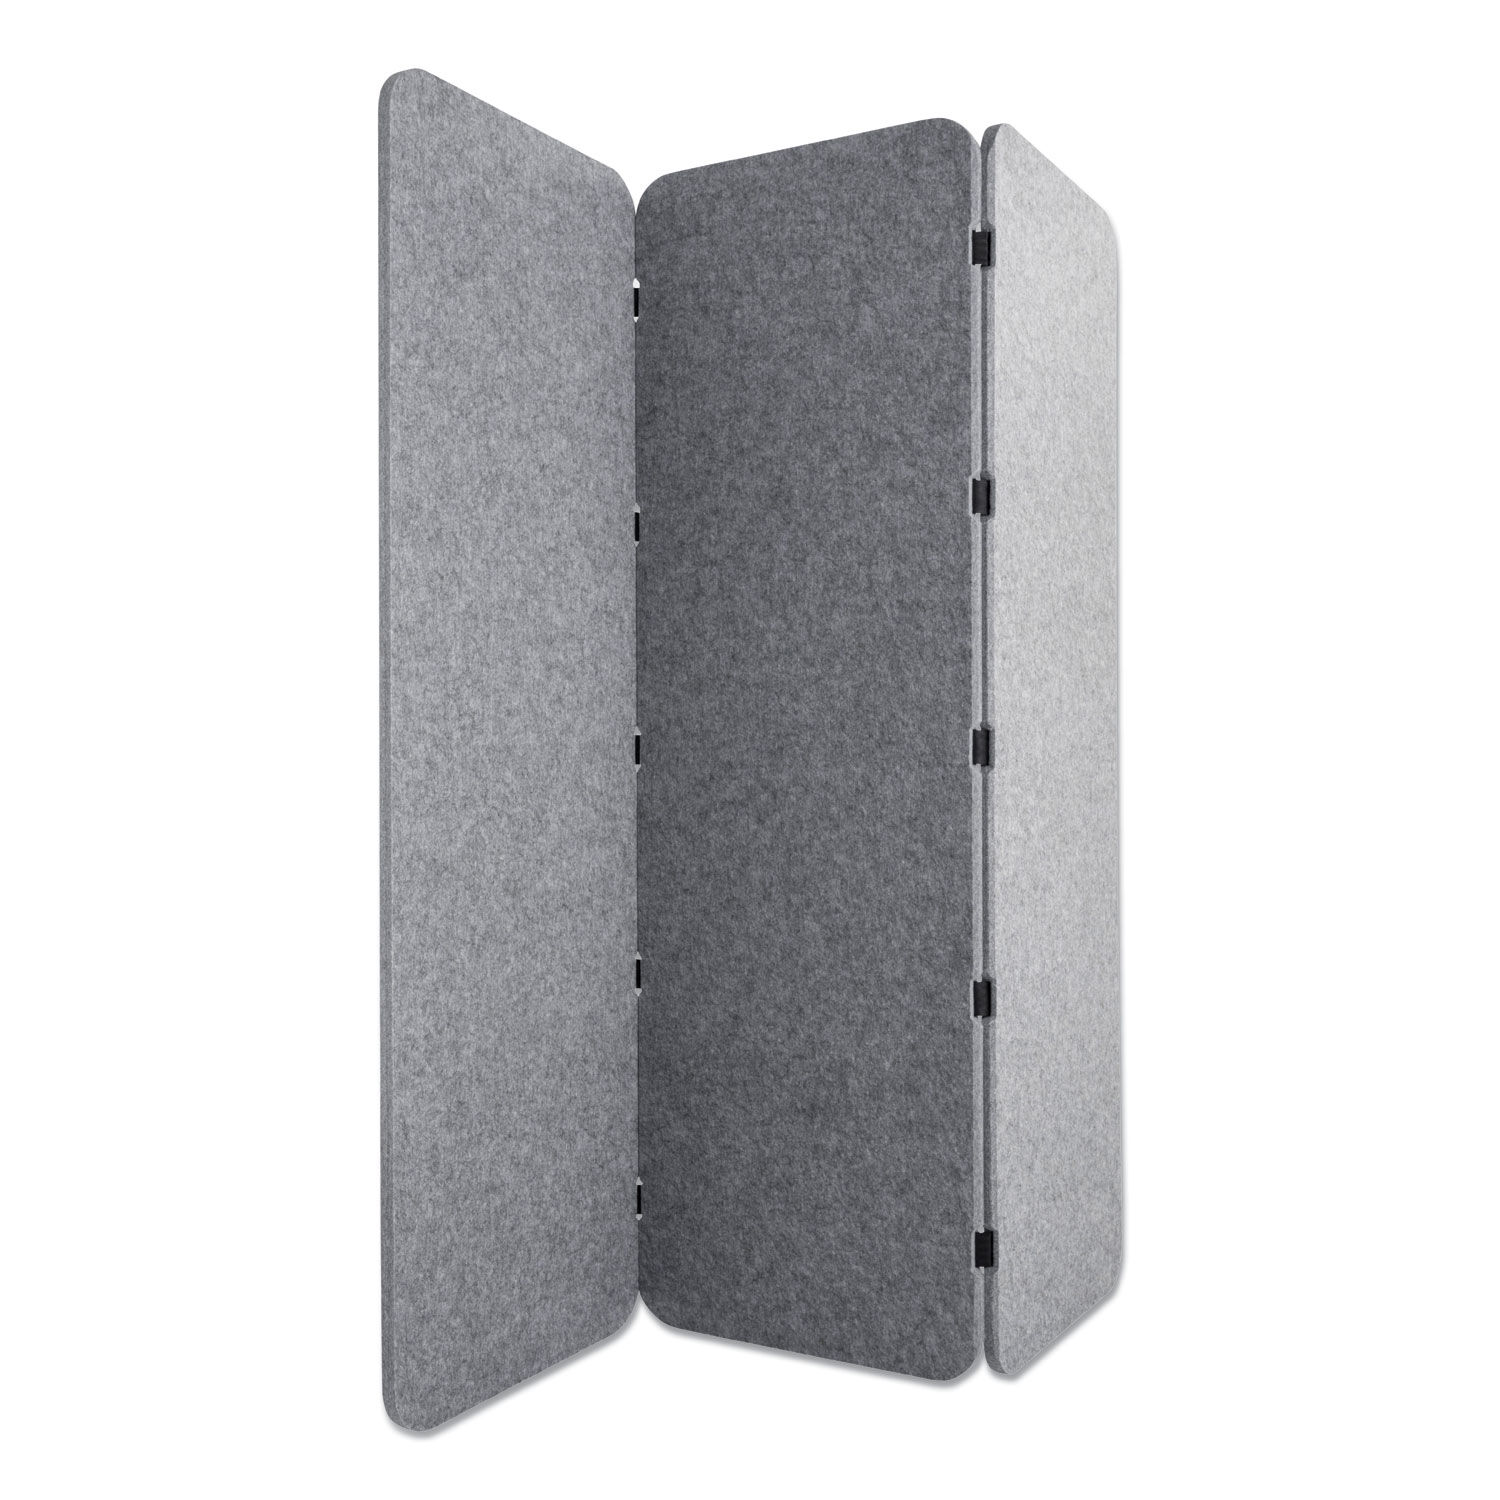  Lumeah LUCO72701G Concertina Foldable Sound Reducing Room Divider Privacy Screen, 70 x 1 x 70, Polyester, Gray (GN1LUCO72701G) 